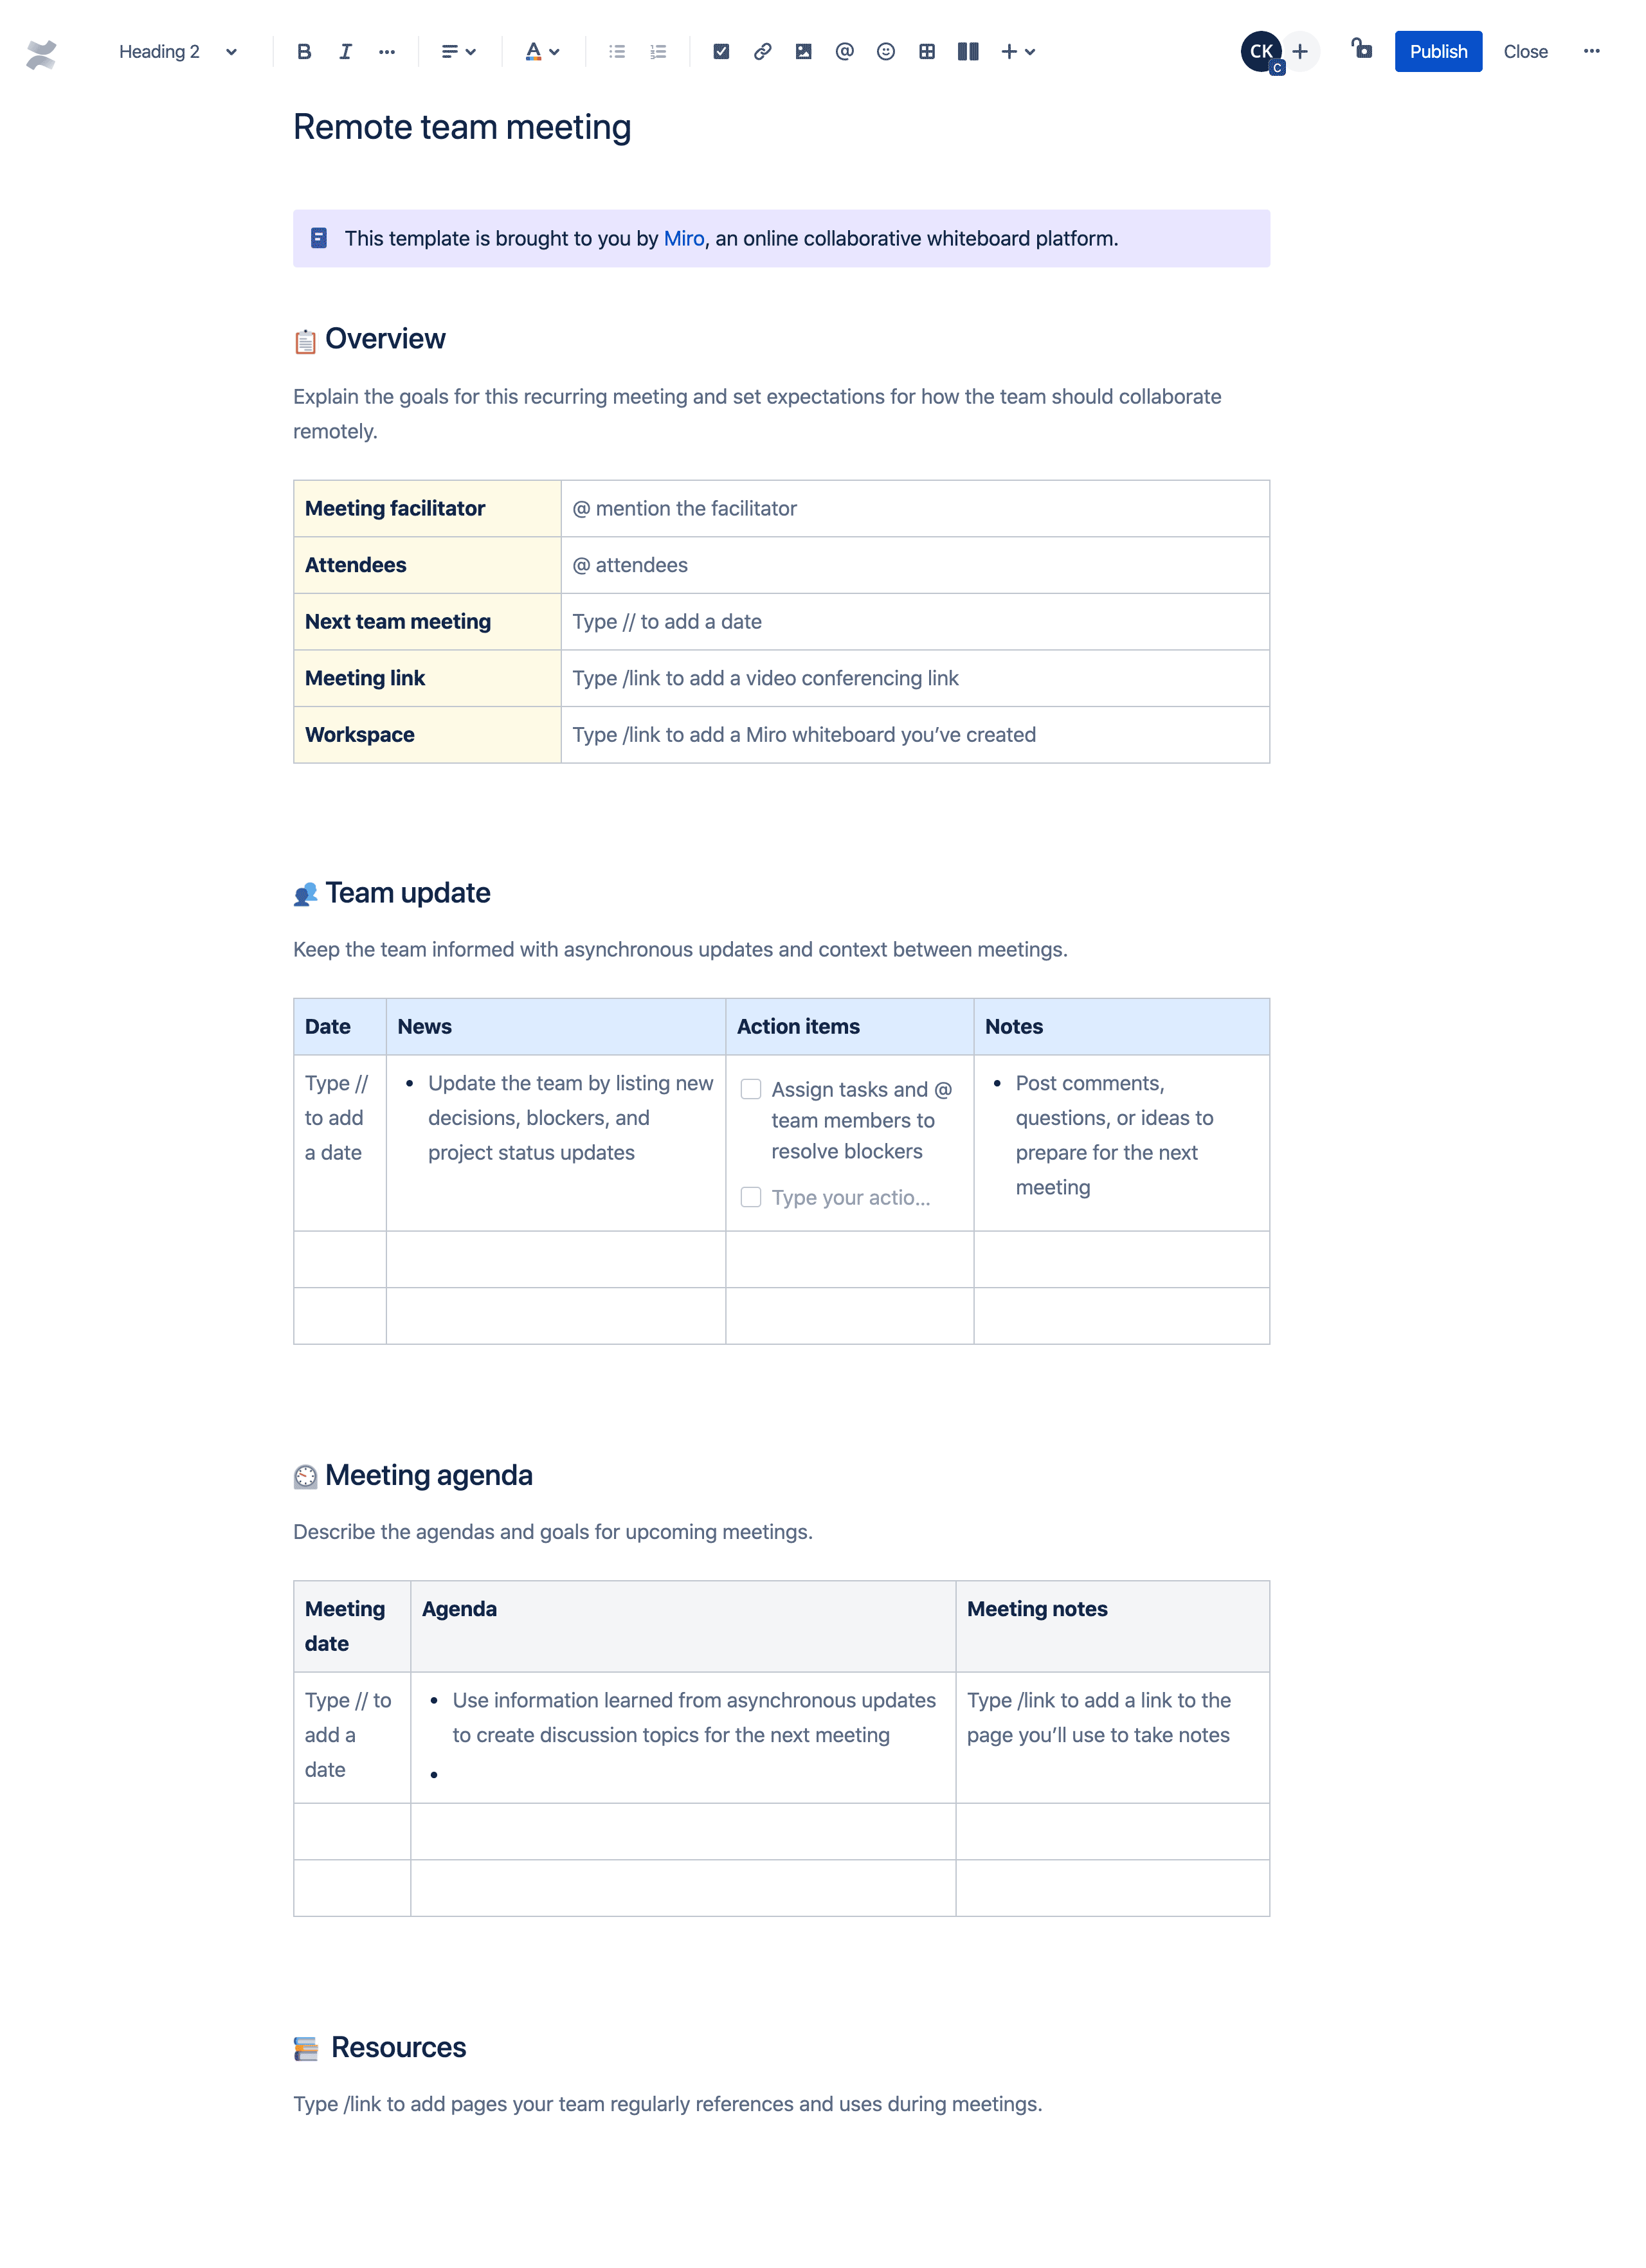 Remote team meeting template